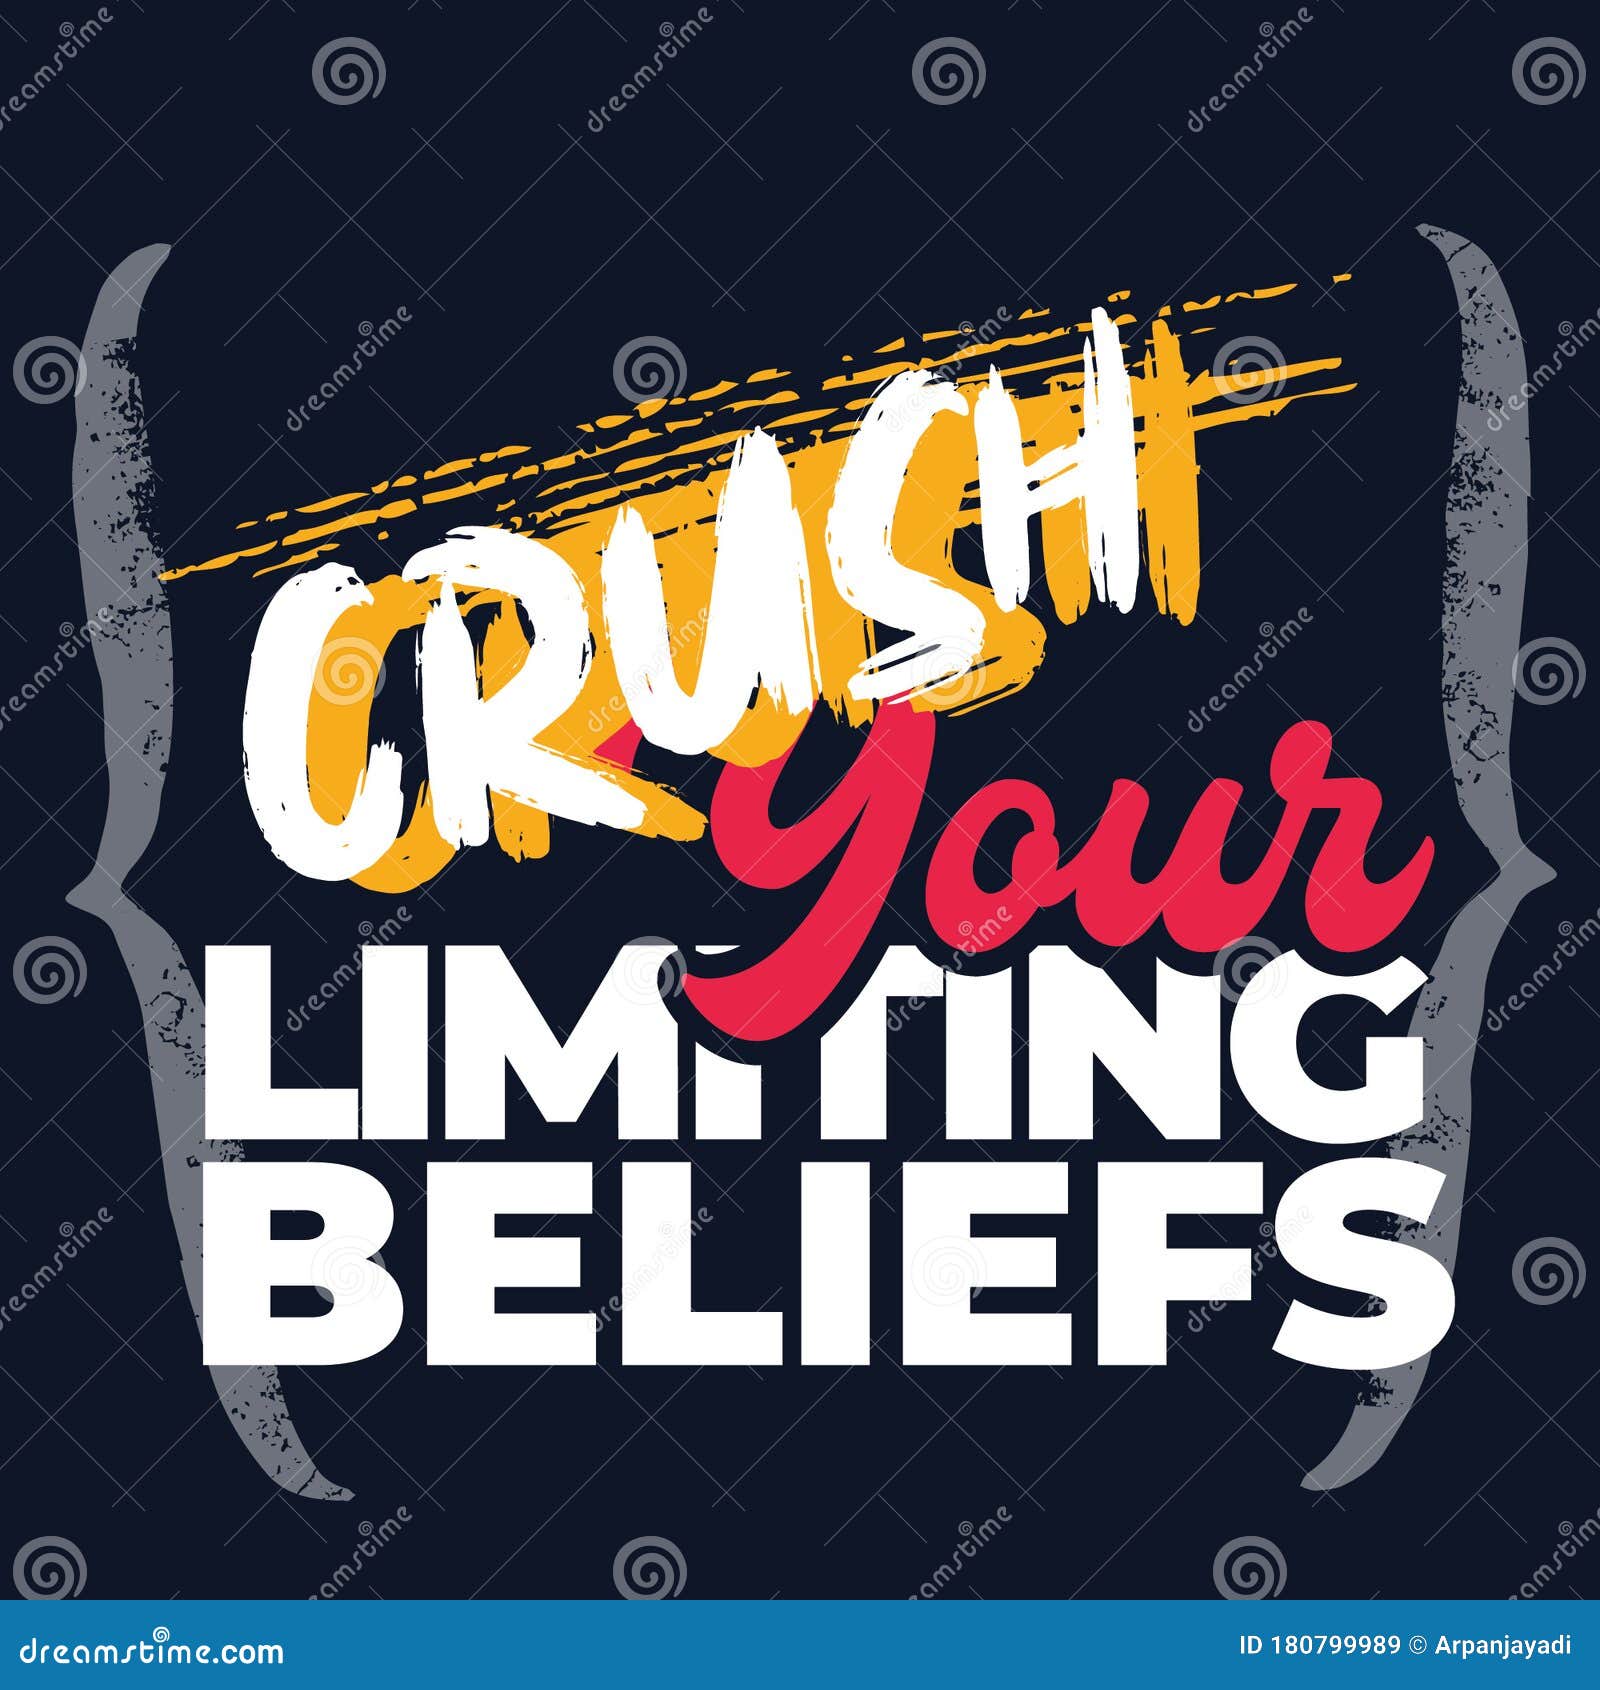 crush your limiting beliefs. motivational quote typography  with grunge background.